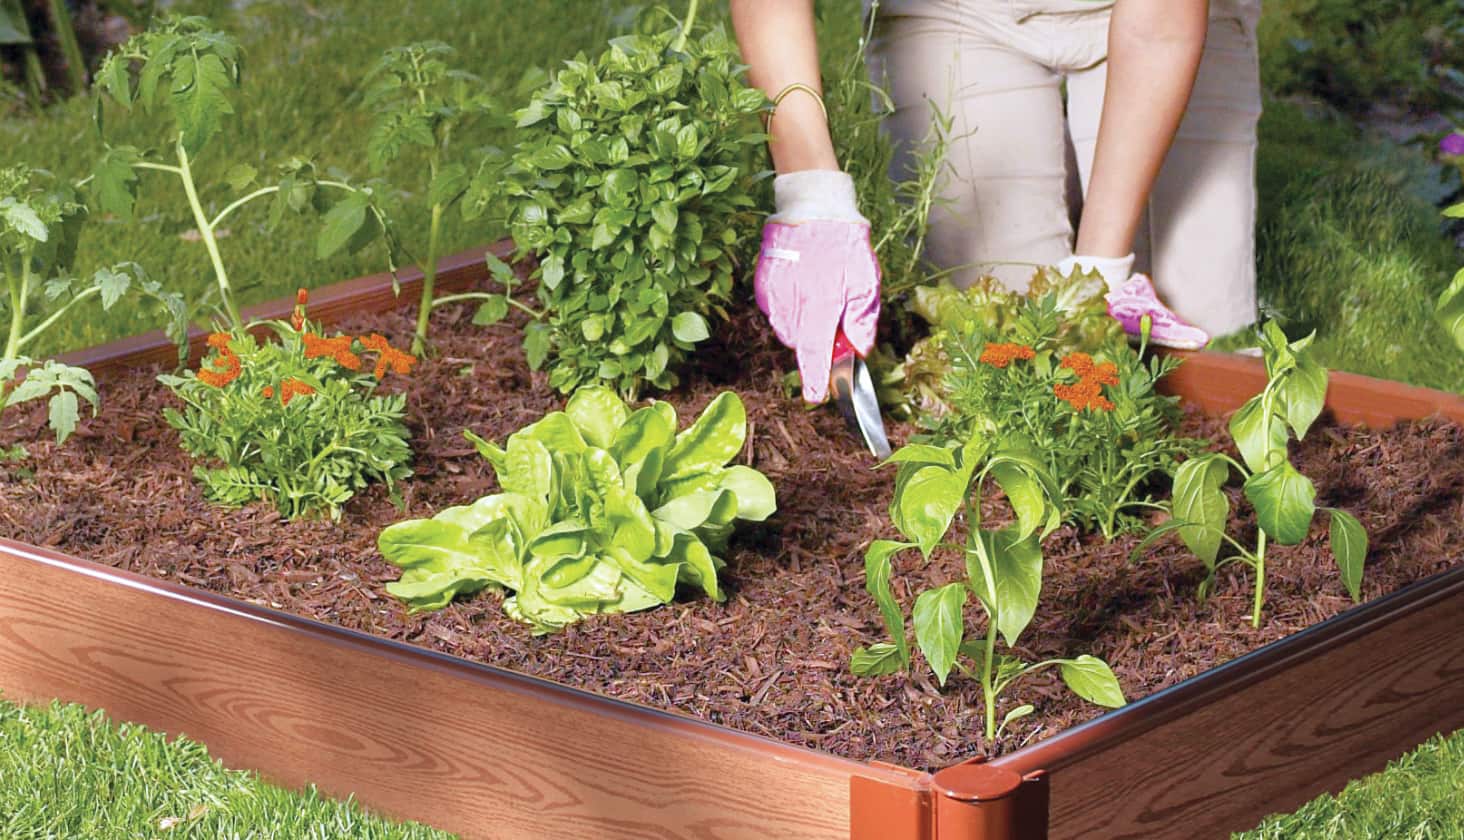 A person gardening in a small box of plants and soil